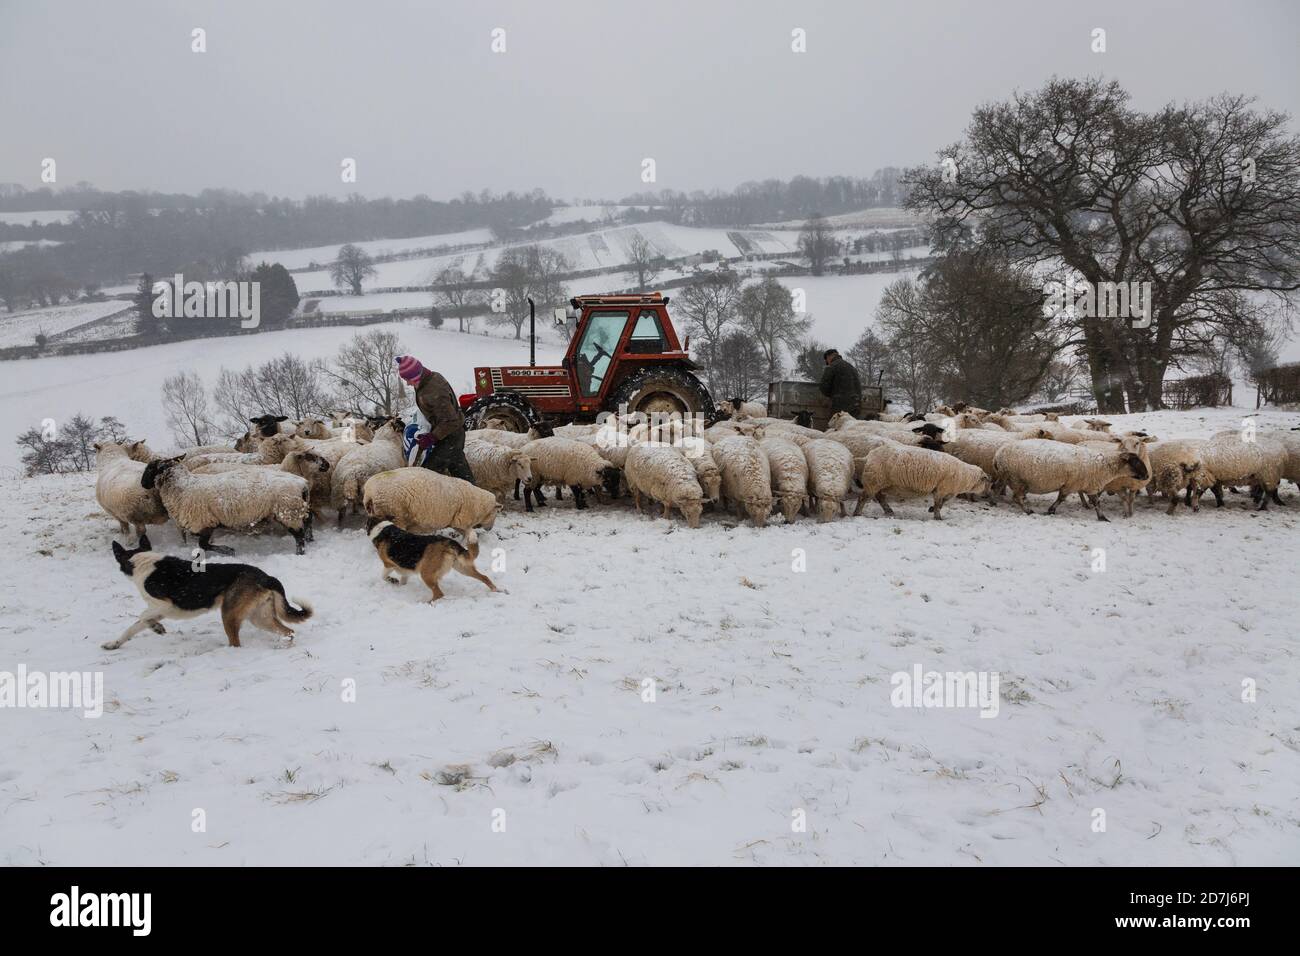 Sheep farmers in Somerset feeding sheep on a snowy day in winter Stock Photo